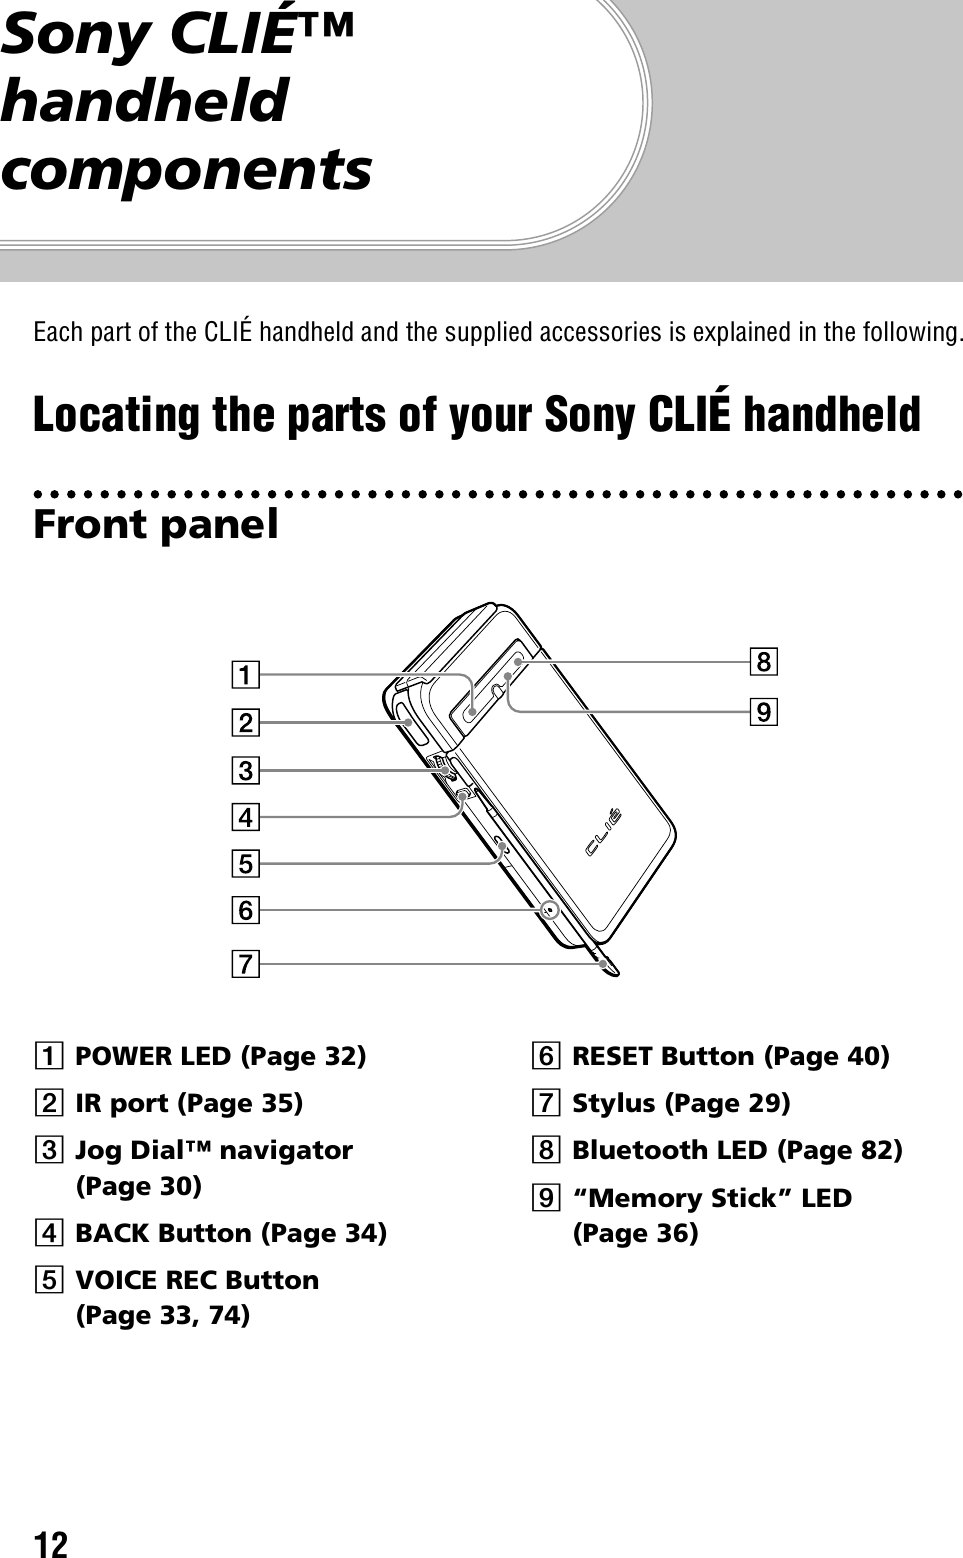 12Sony CLIÉ™ handheld componentsEach part of the CLIÉ handheld and the supplied accessories is explained in the following.Locating the parts of your Sony CLIÉ handheldFront panelAPOWER LED (Page 32)BIR port (Page 35)CJog Dial™ navigator (Page 30)DBACK Button (Page 34)EVOICE REC Button(Page 33, 74)FRESET Button (Page 40)GStylus (Page 29)HBluetooth LED (Page 82)I“Memory Stick” LED (Page 36)